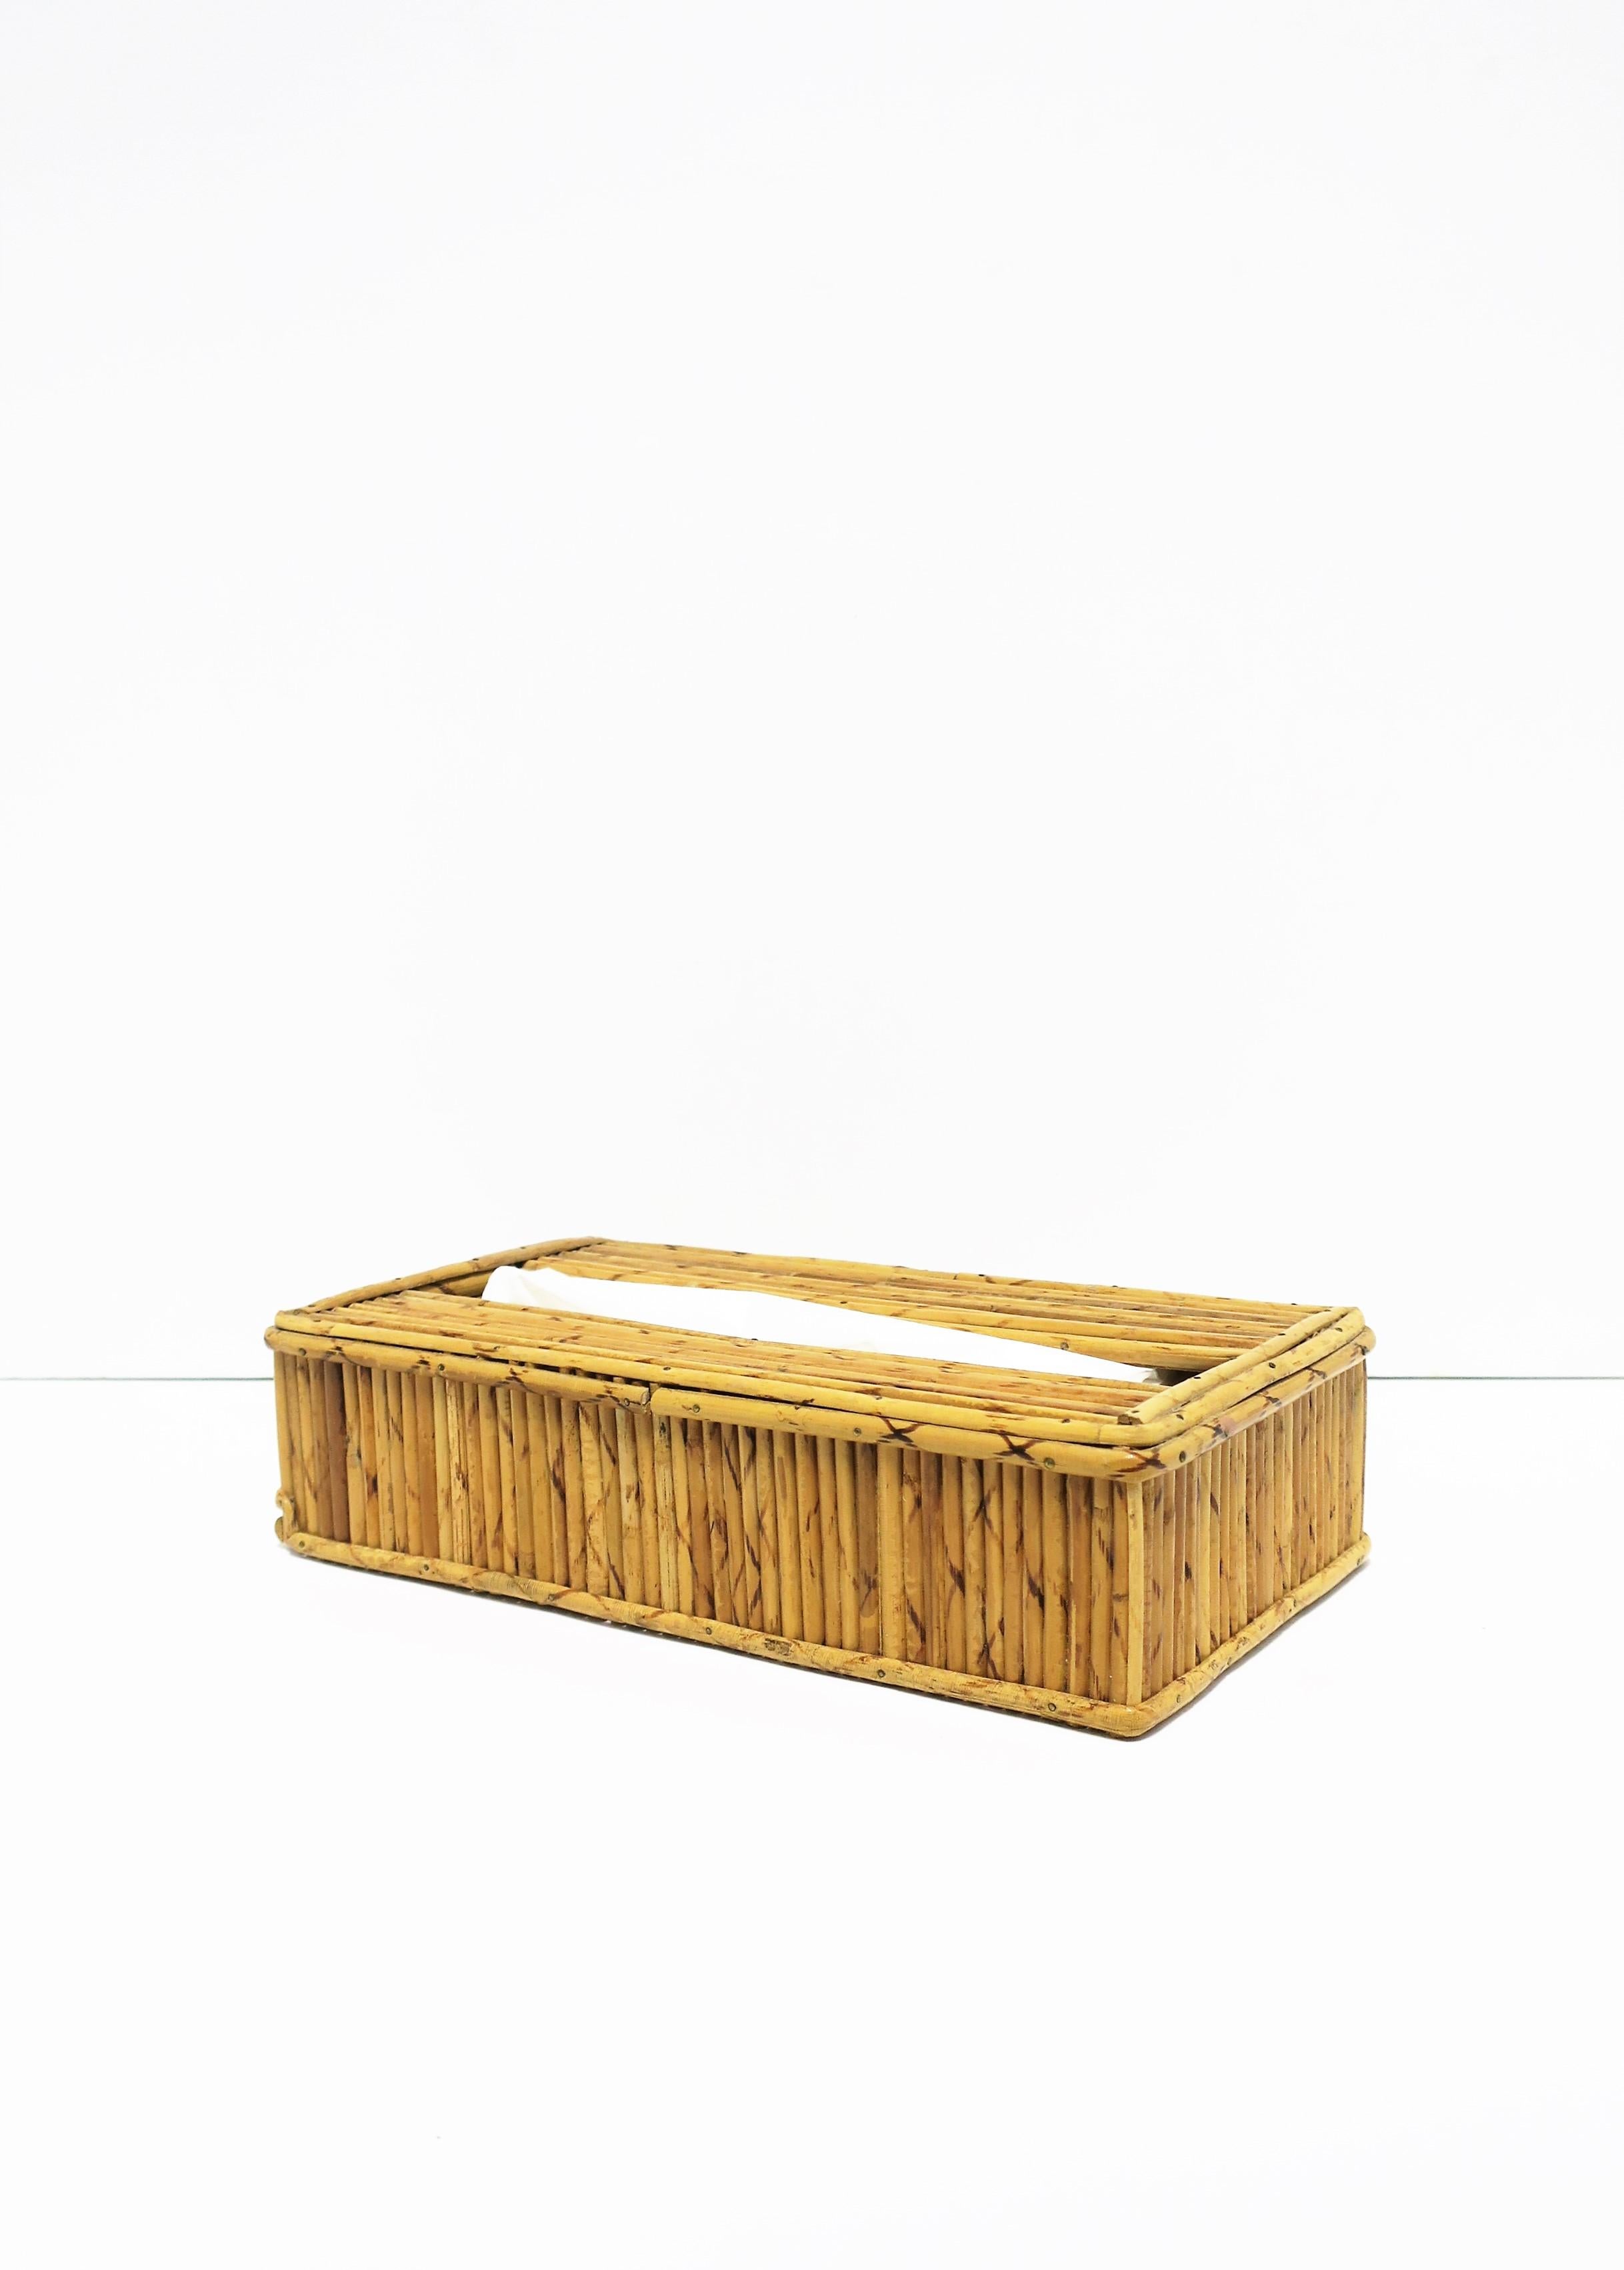 Wicker Tissue Box Cover Holder in the Crespi Style In Good Condition For Sale In New York, NY